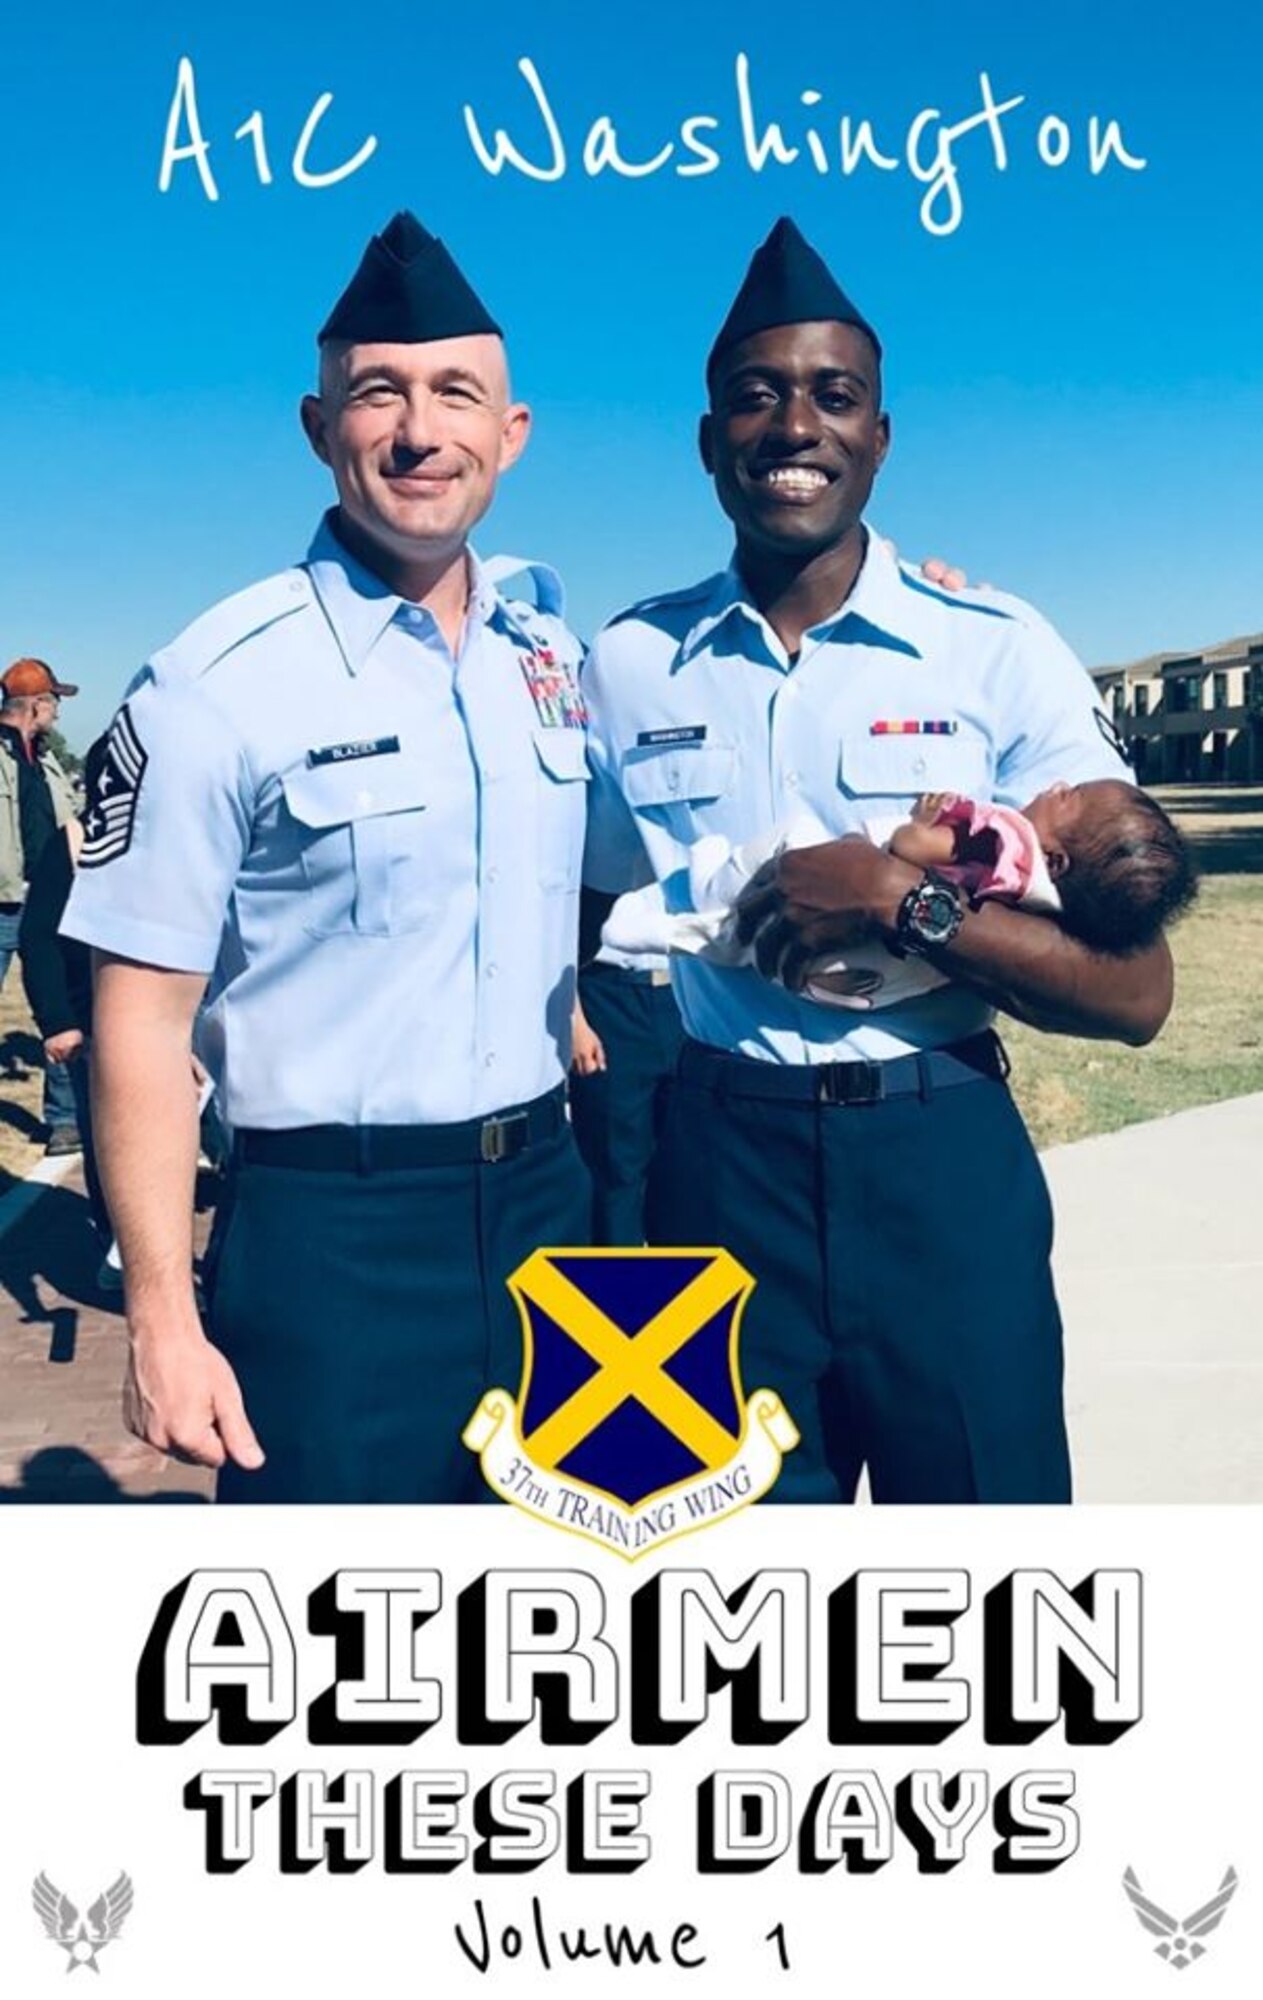 Airmen 1st Class Washington celebrates Basic Military Training graduation with Chief Master Sgt. Stefan Blazier, 37th Training Wing command chief. Washington holds his 12-week-old daughter and kicks off his Air Force career.